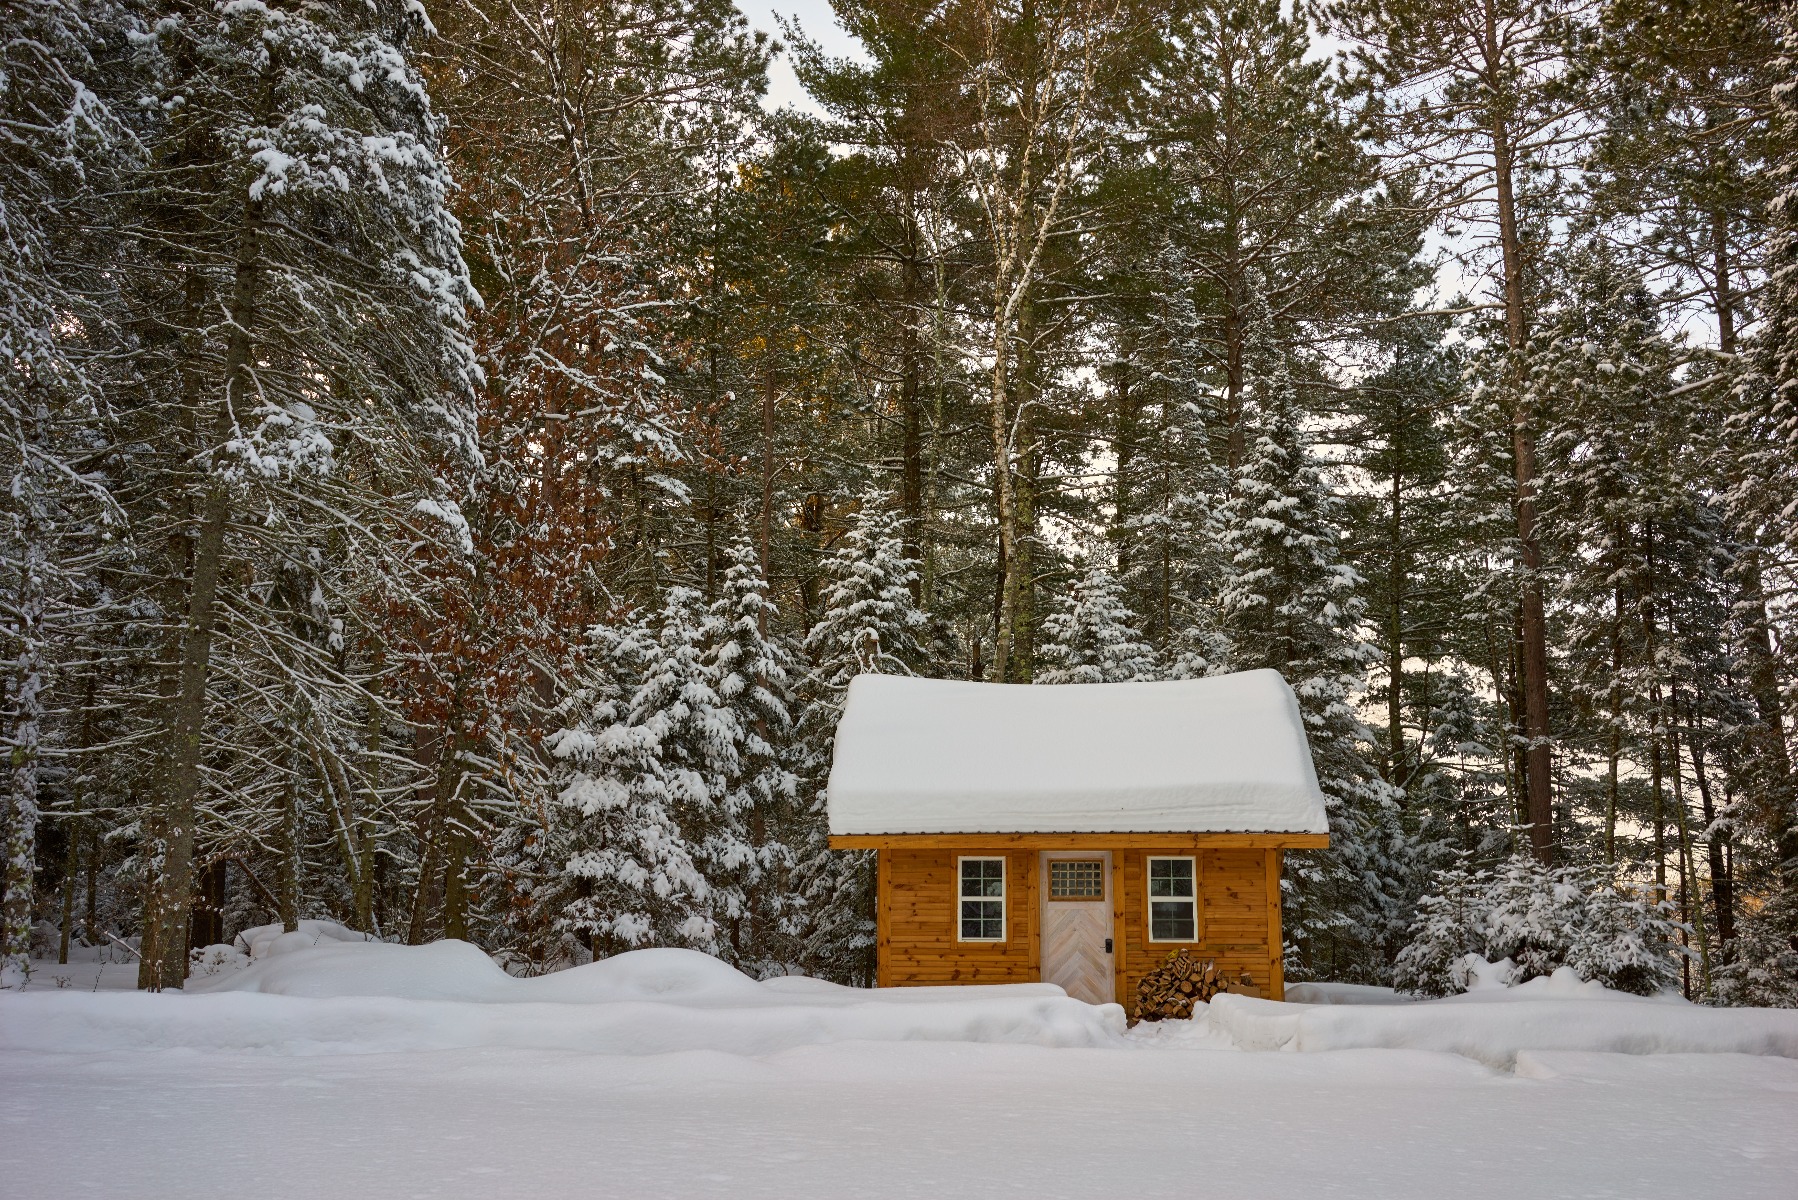 Proper maintenance will ensure your cabin stands for many Winters to come